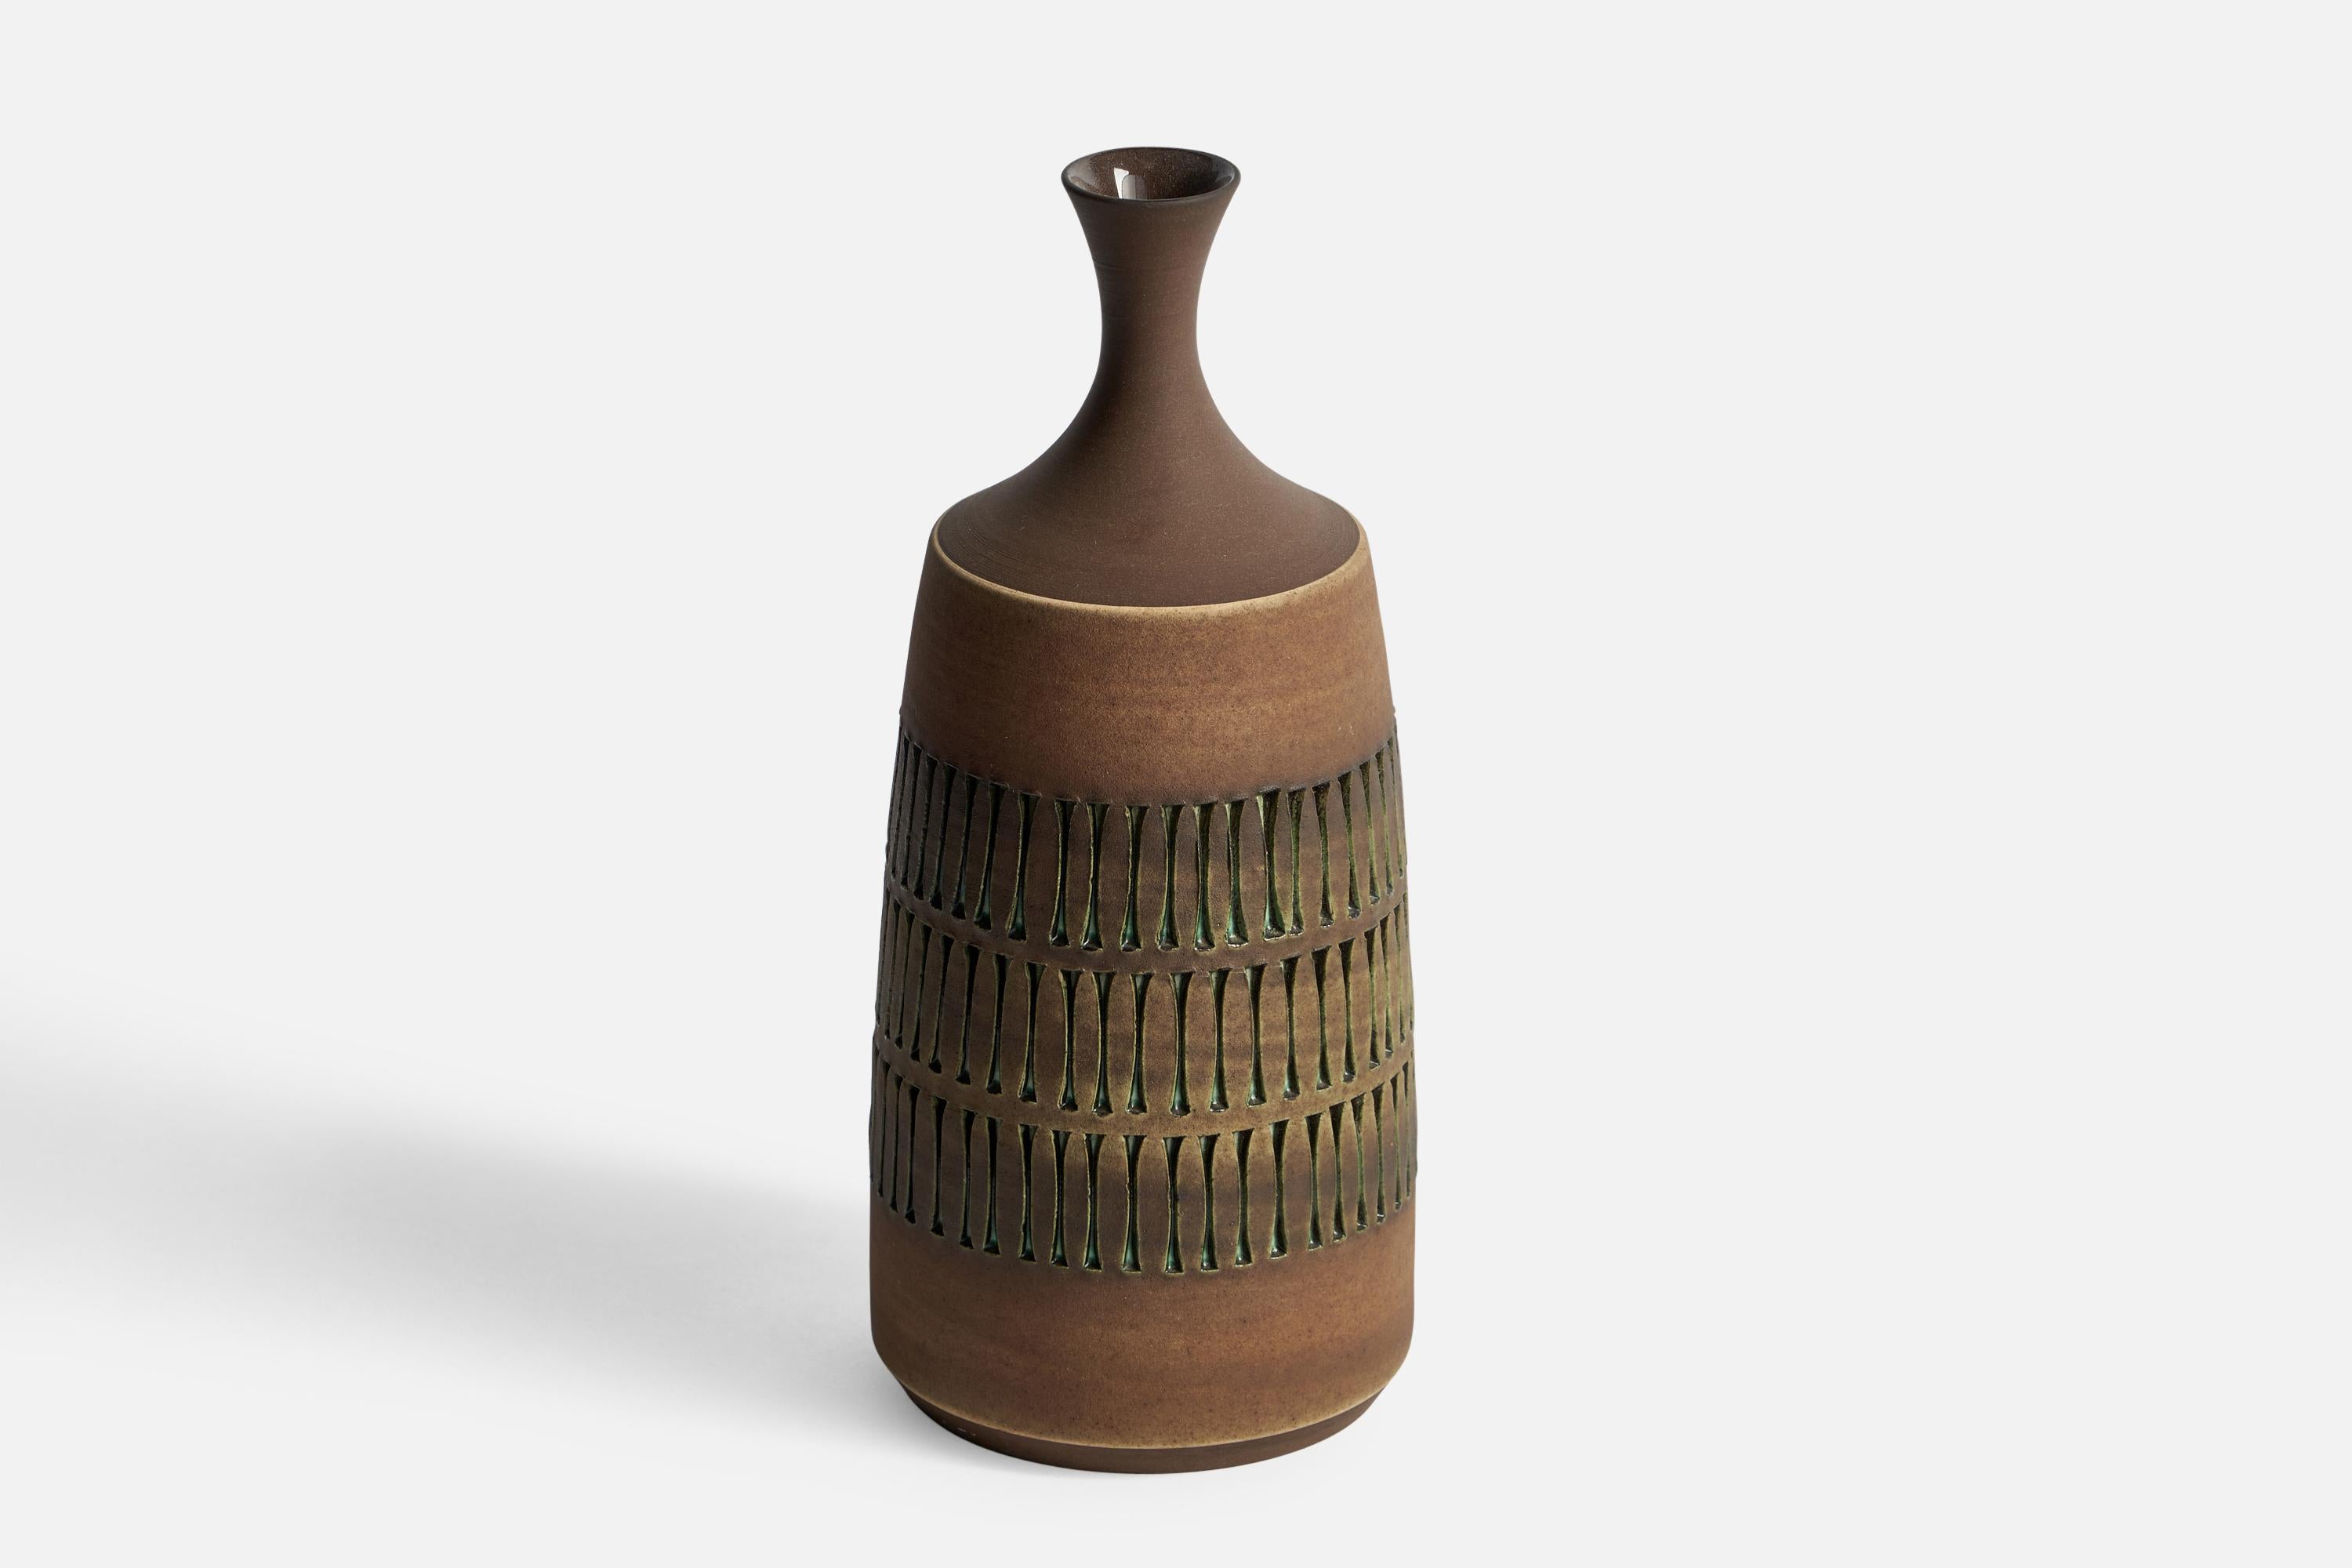 A brown and green ceramic vase designed and produced by Tomas Anagrius, Sweden, 1960s.